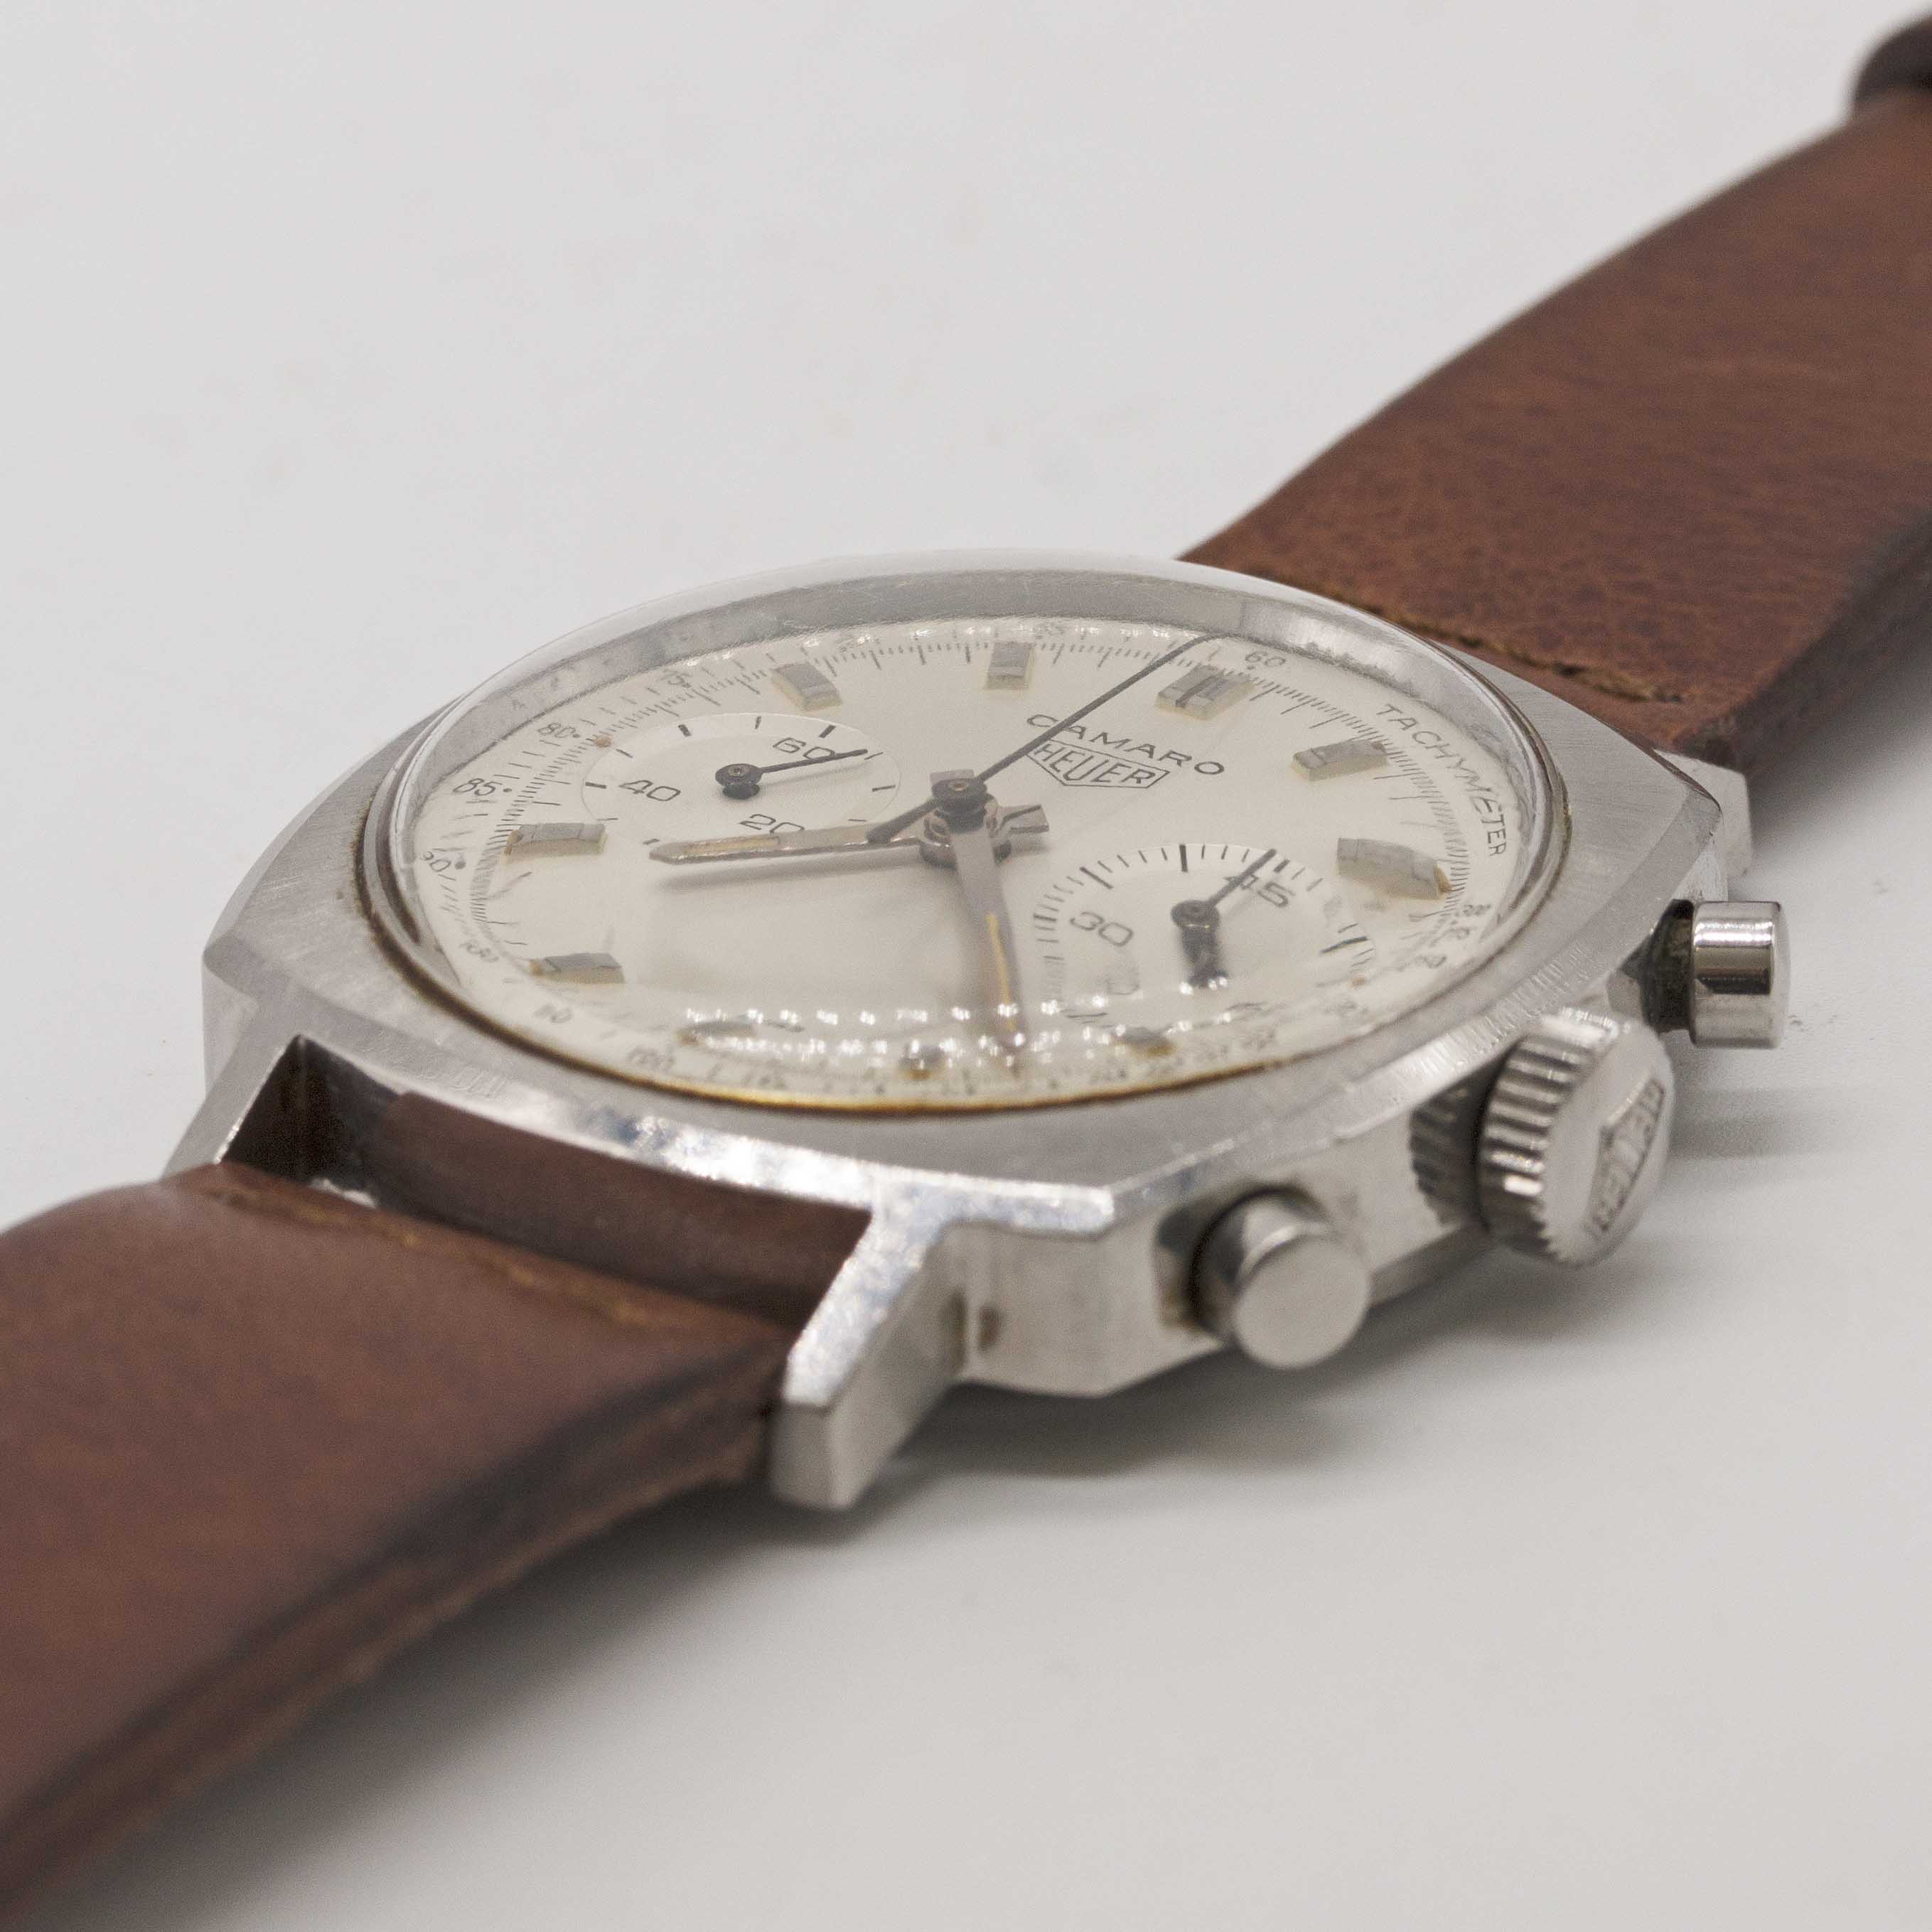 A GENTLEMAN'S STAINLESS STEEL HEUER CAMARO CHRONOGRAPH WRIST WATCH CIRCA 1970, REF. 9220T WITH - Image 3 of 9